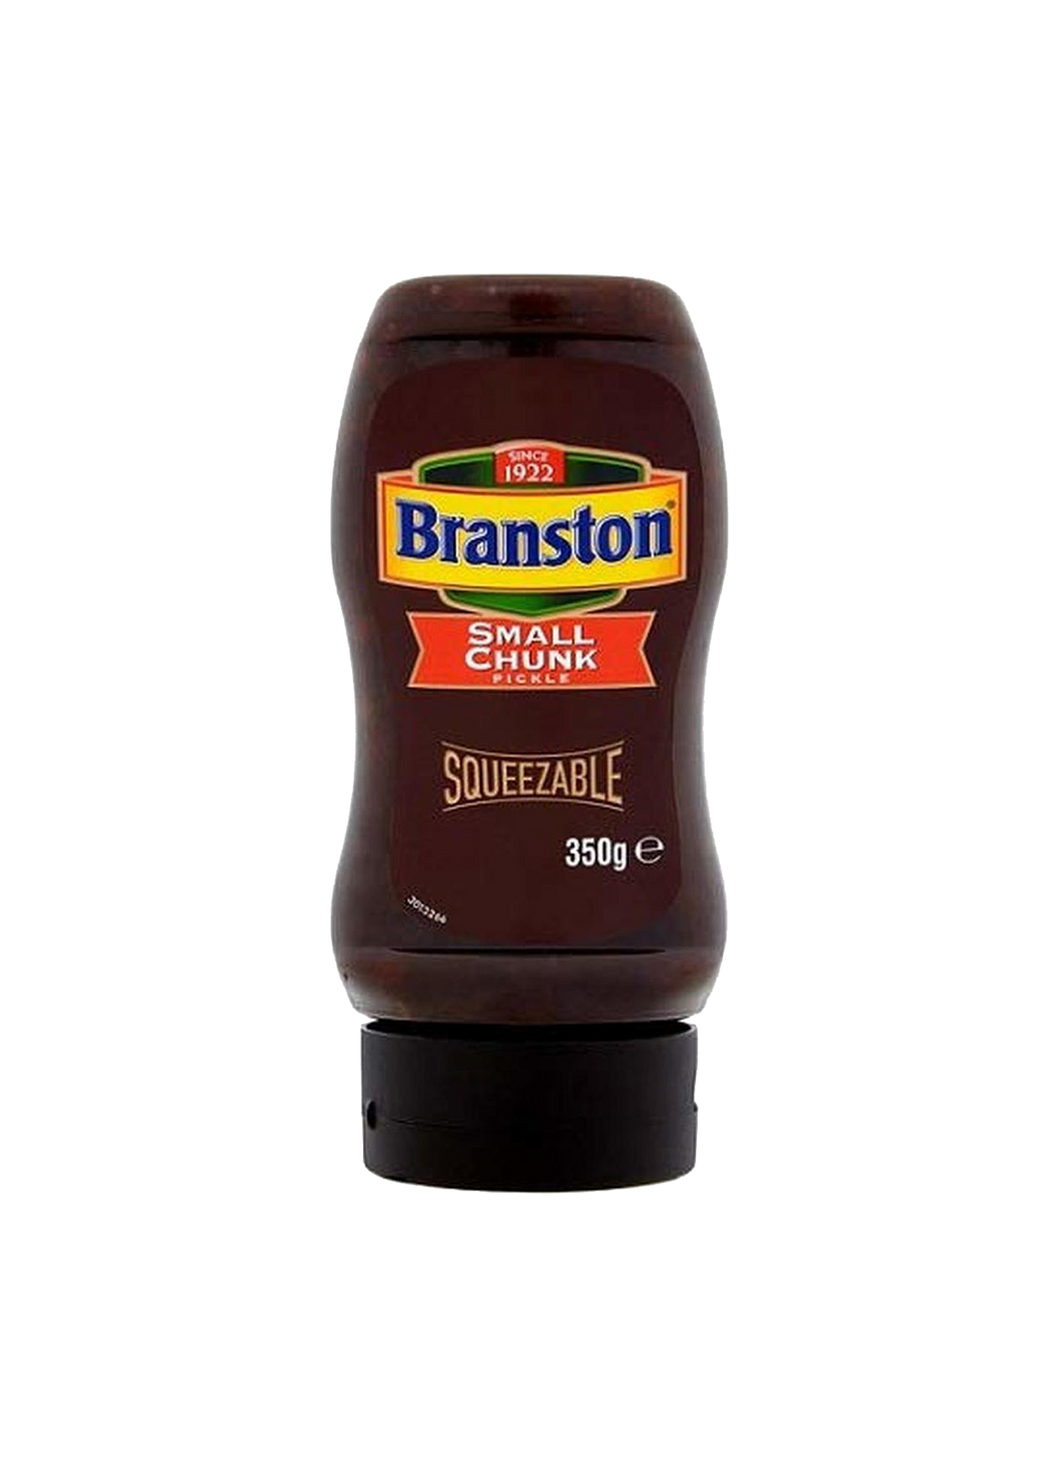 Branston Small Chunk Pickle Squeezable 350g